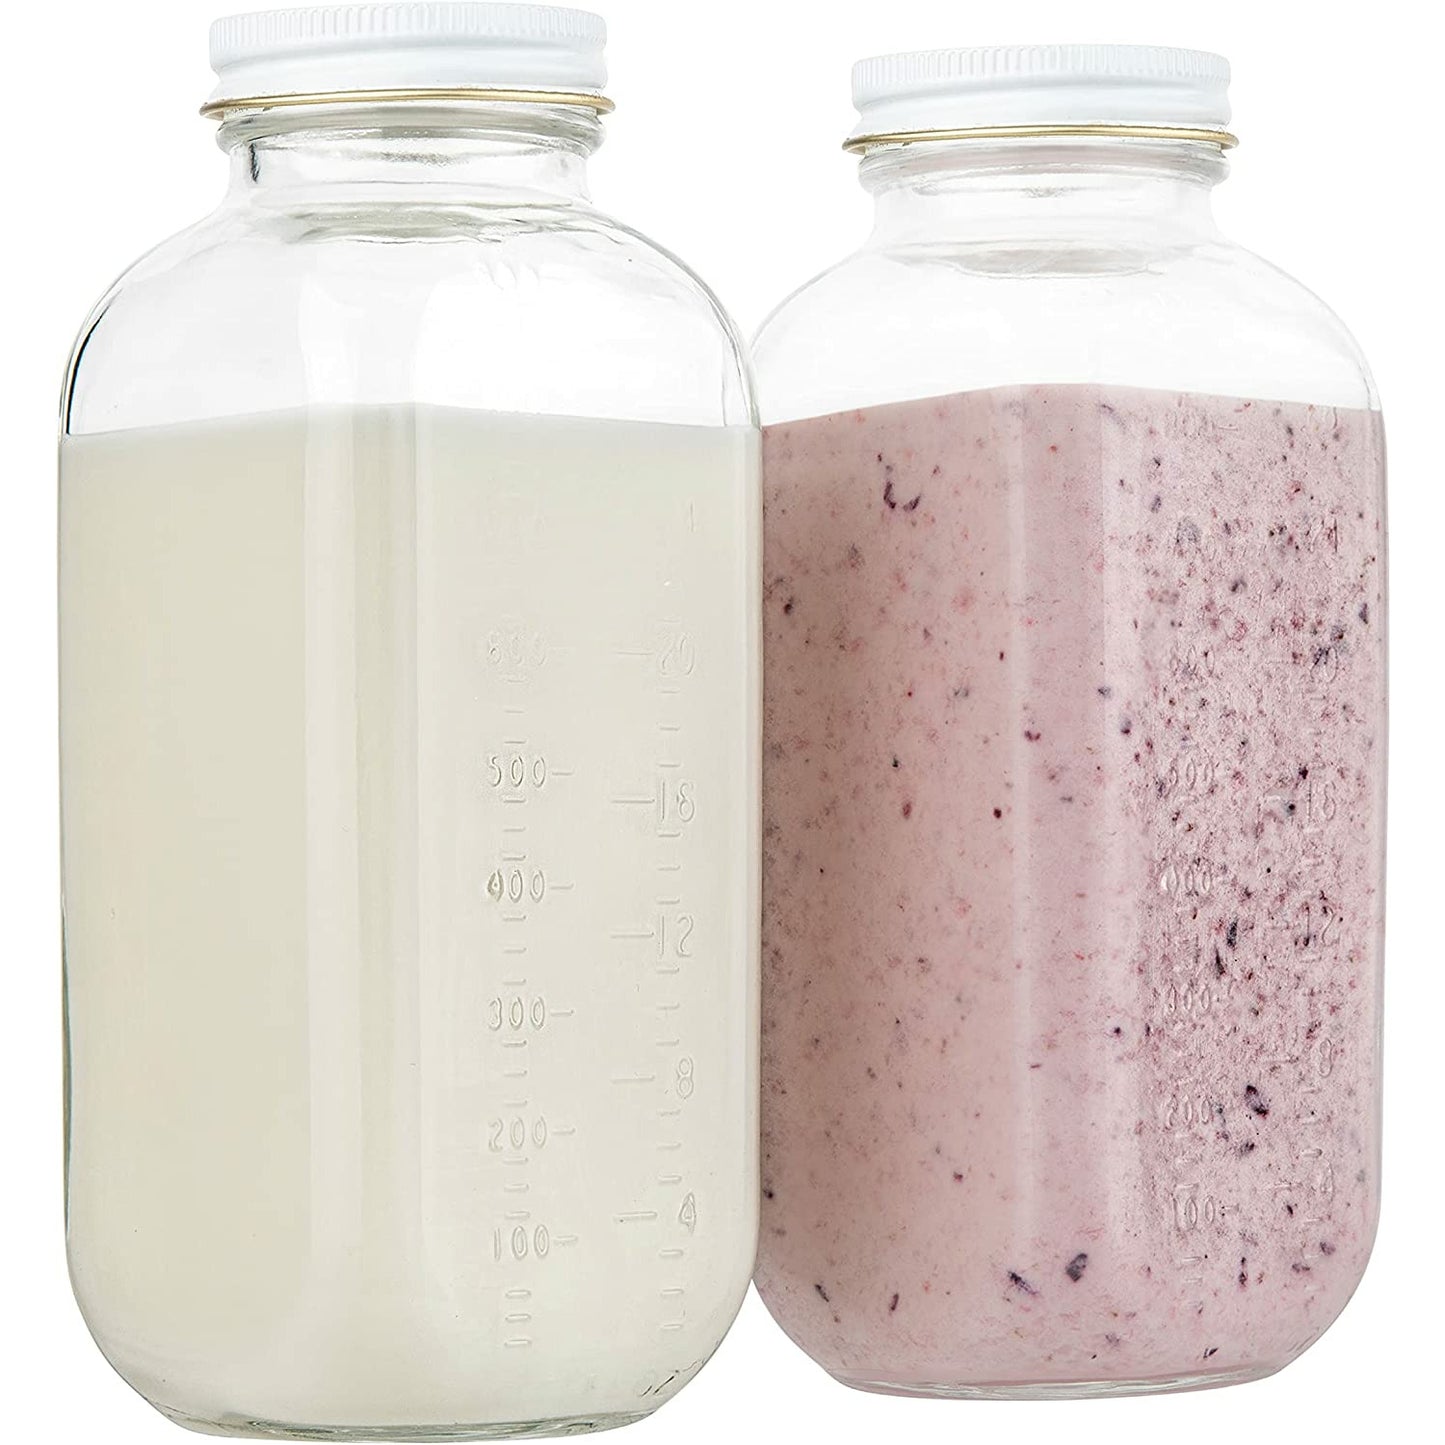 32oz Square Glass Milk Bottle with Metal Airtight Lids